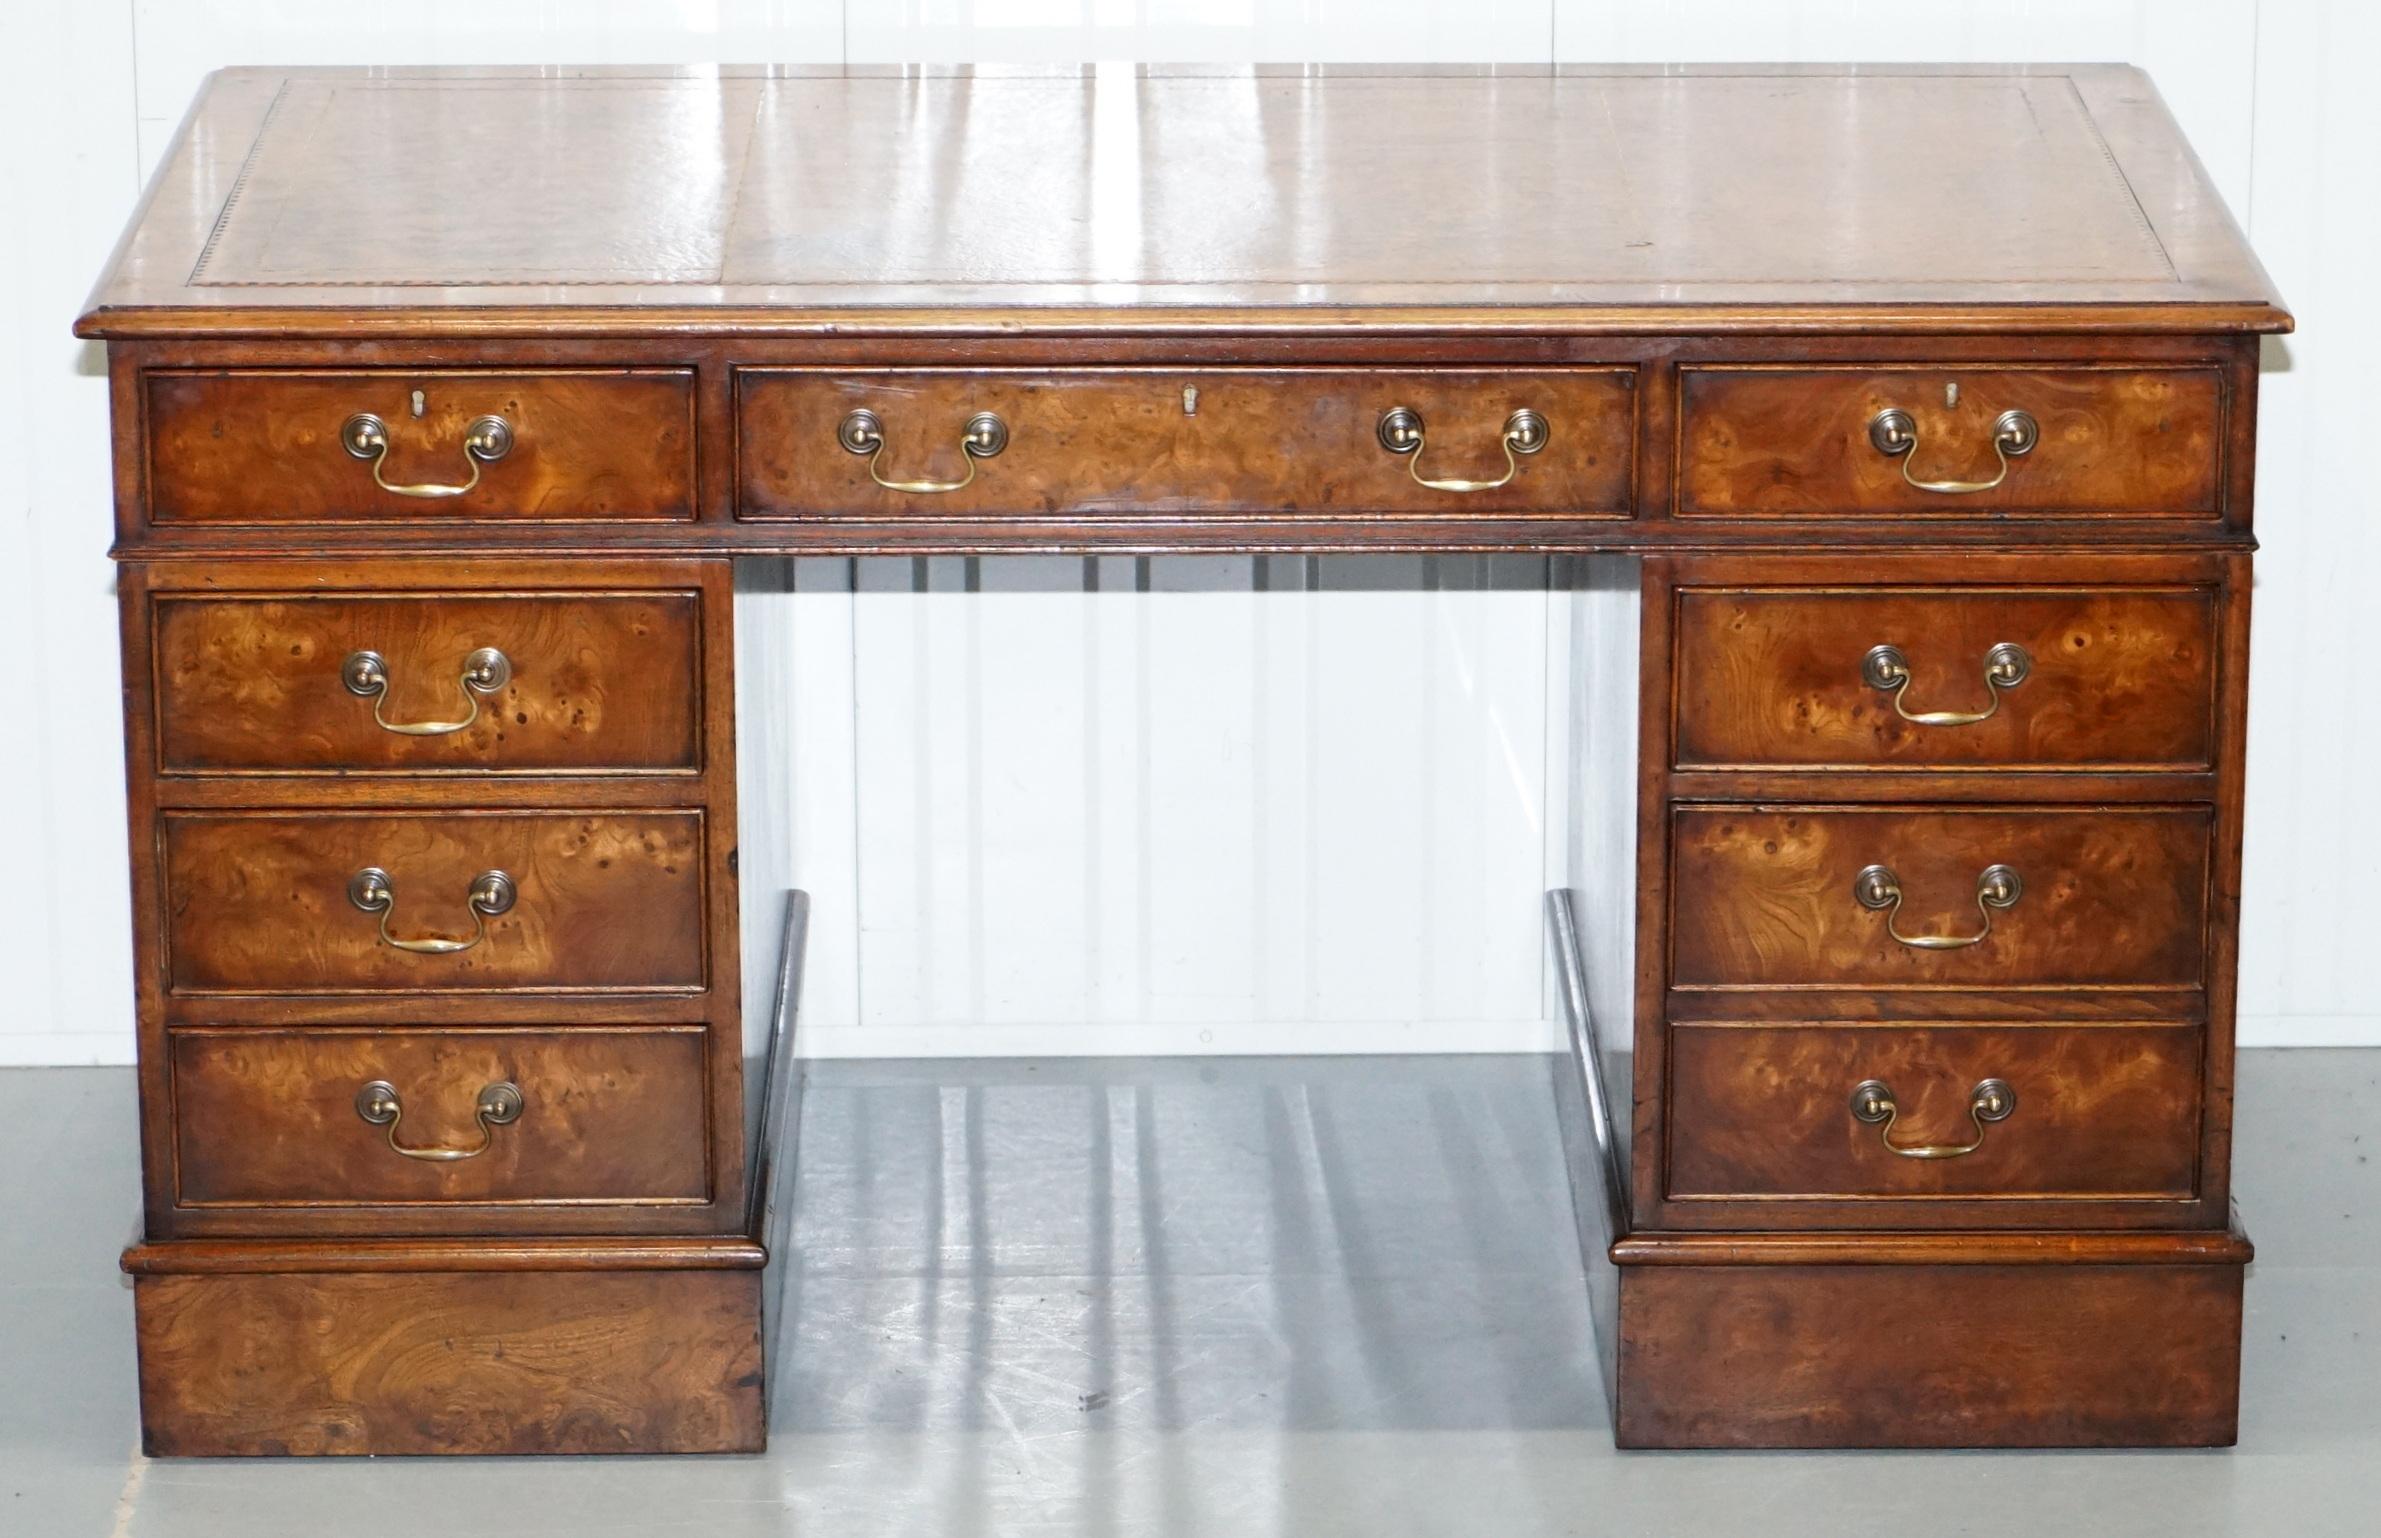 We are delighted to offer for sale this lovely vintage burr walnut twin pedestal partner desk with gold-tooled brown leather writing surface

This desk has the tradition drawer formation which is all standard drawers and one bottom right double